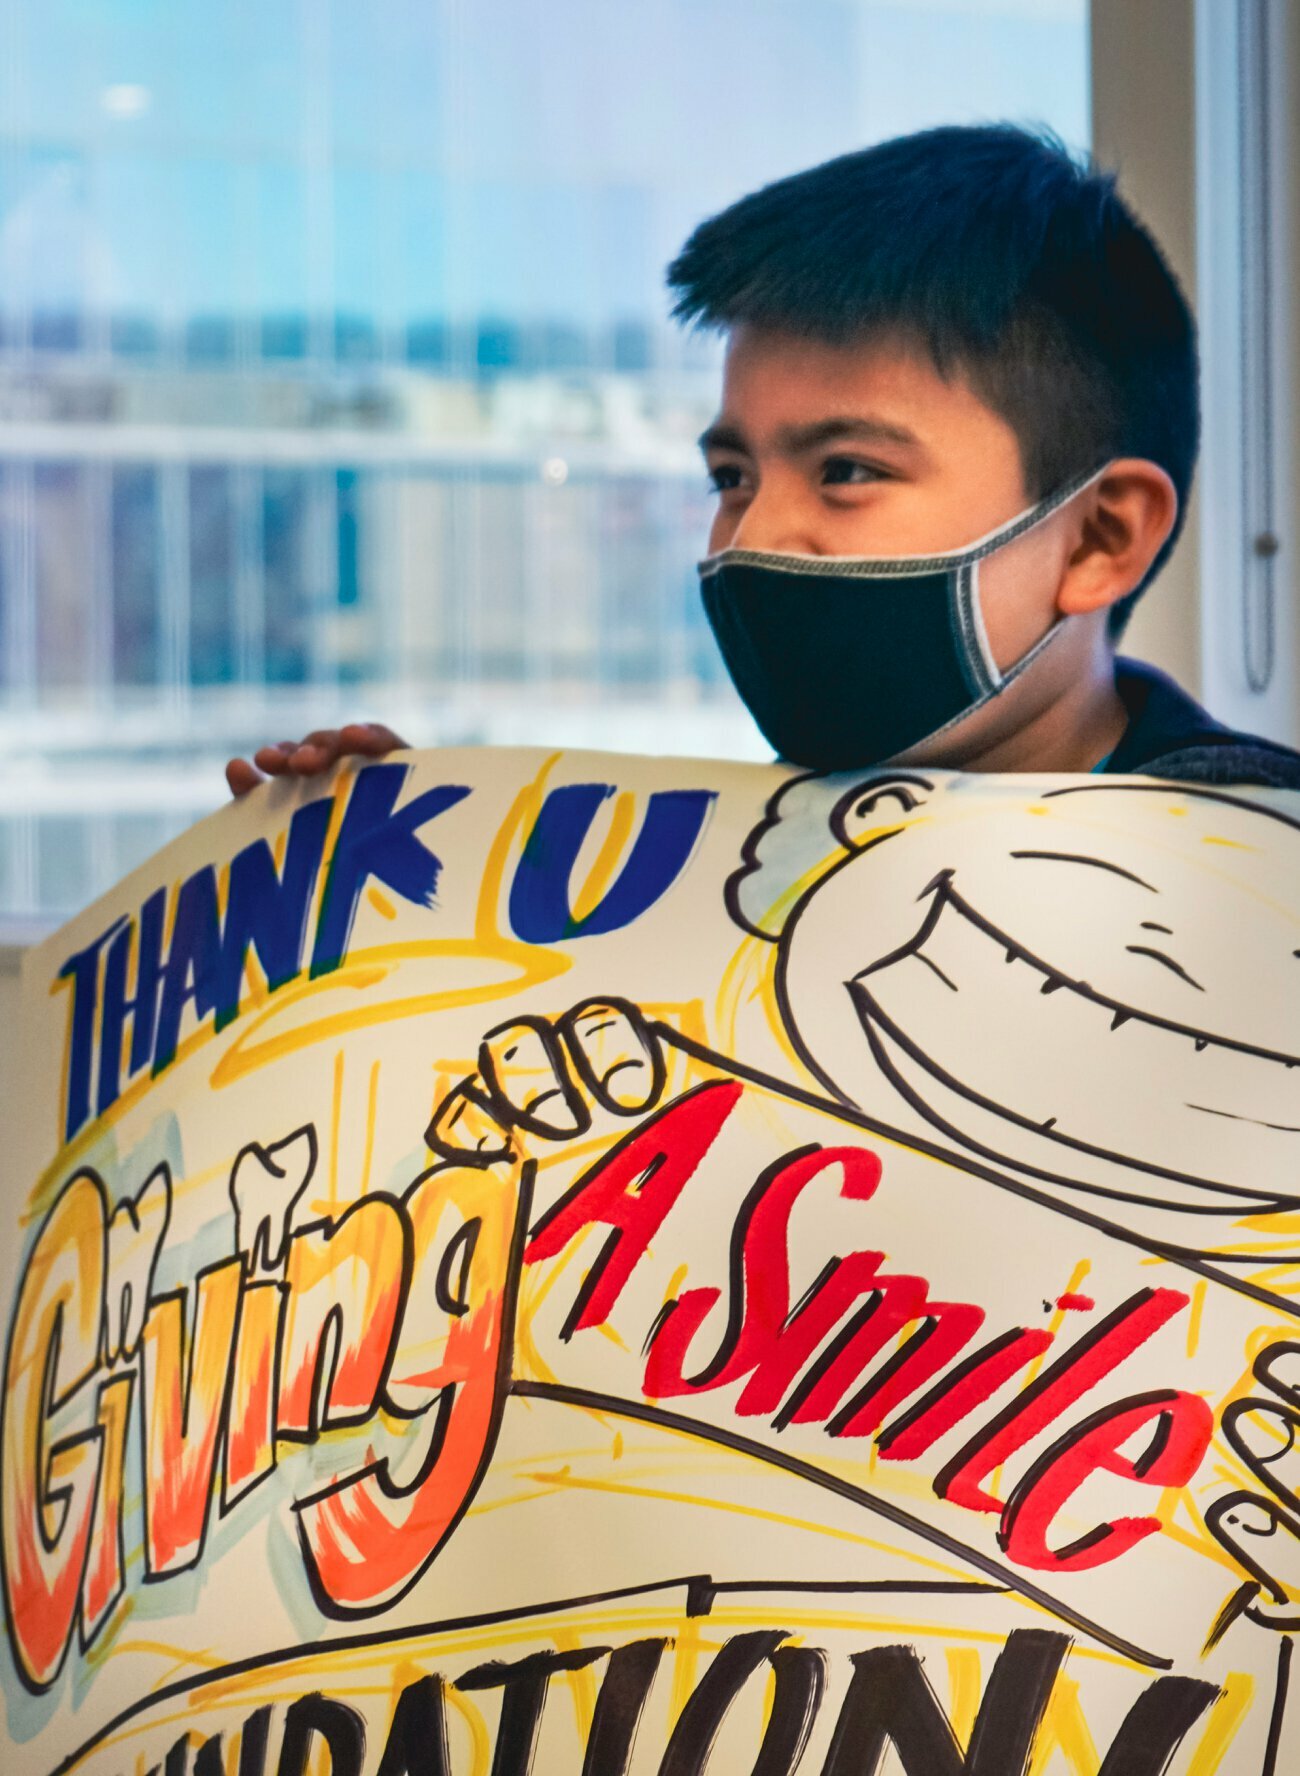 Beverly Hills Cosmetic Dentistry child patient holding a thank you sign